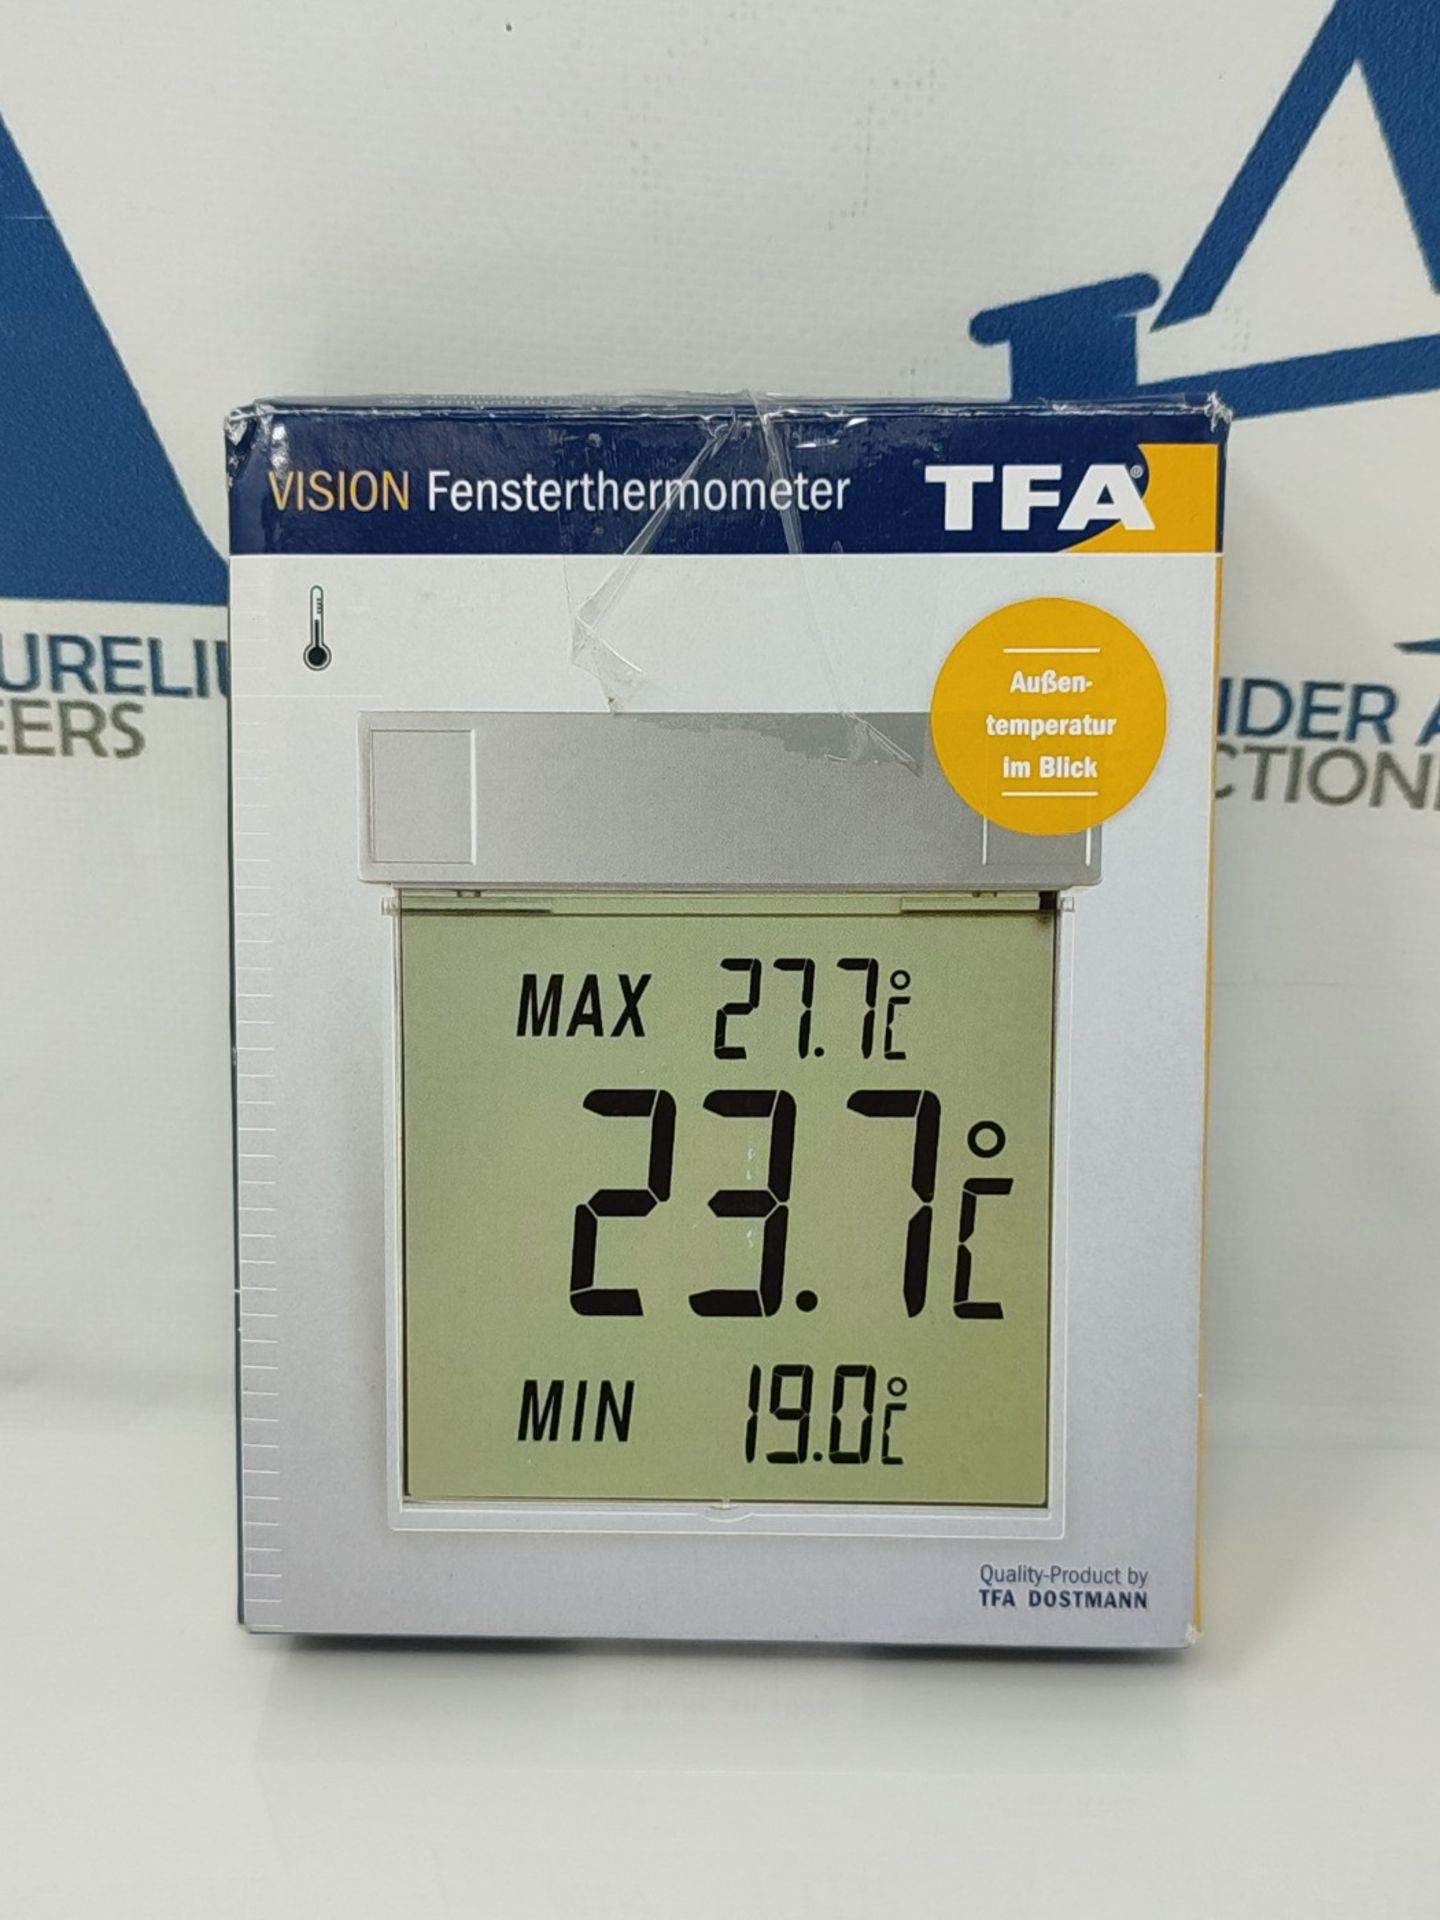 TFA Dostmann Vision Digital Window Thermometer, 30.1025, large display with outside te - Image 2 of 3